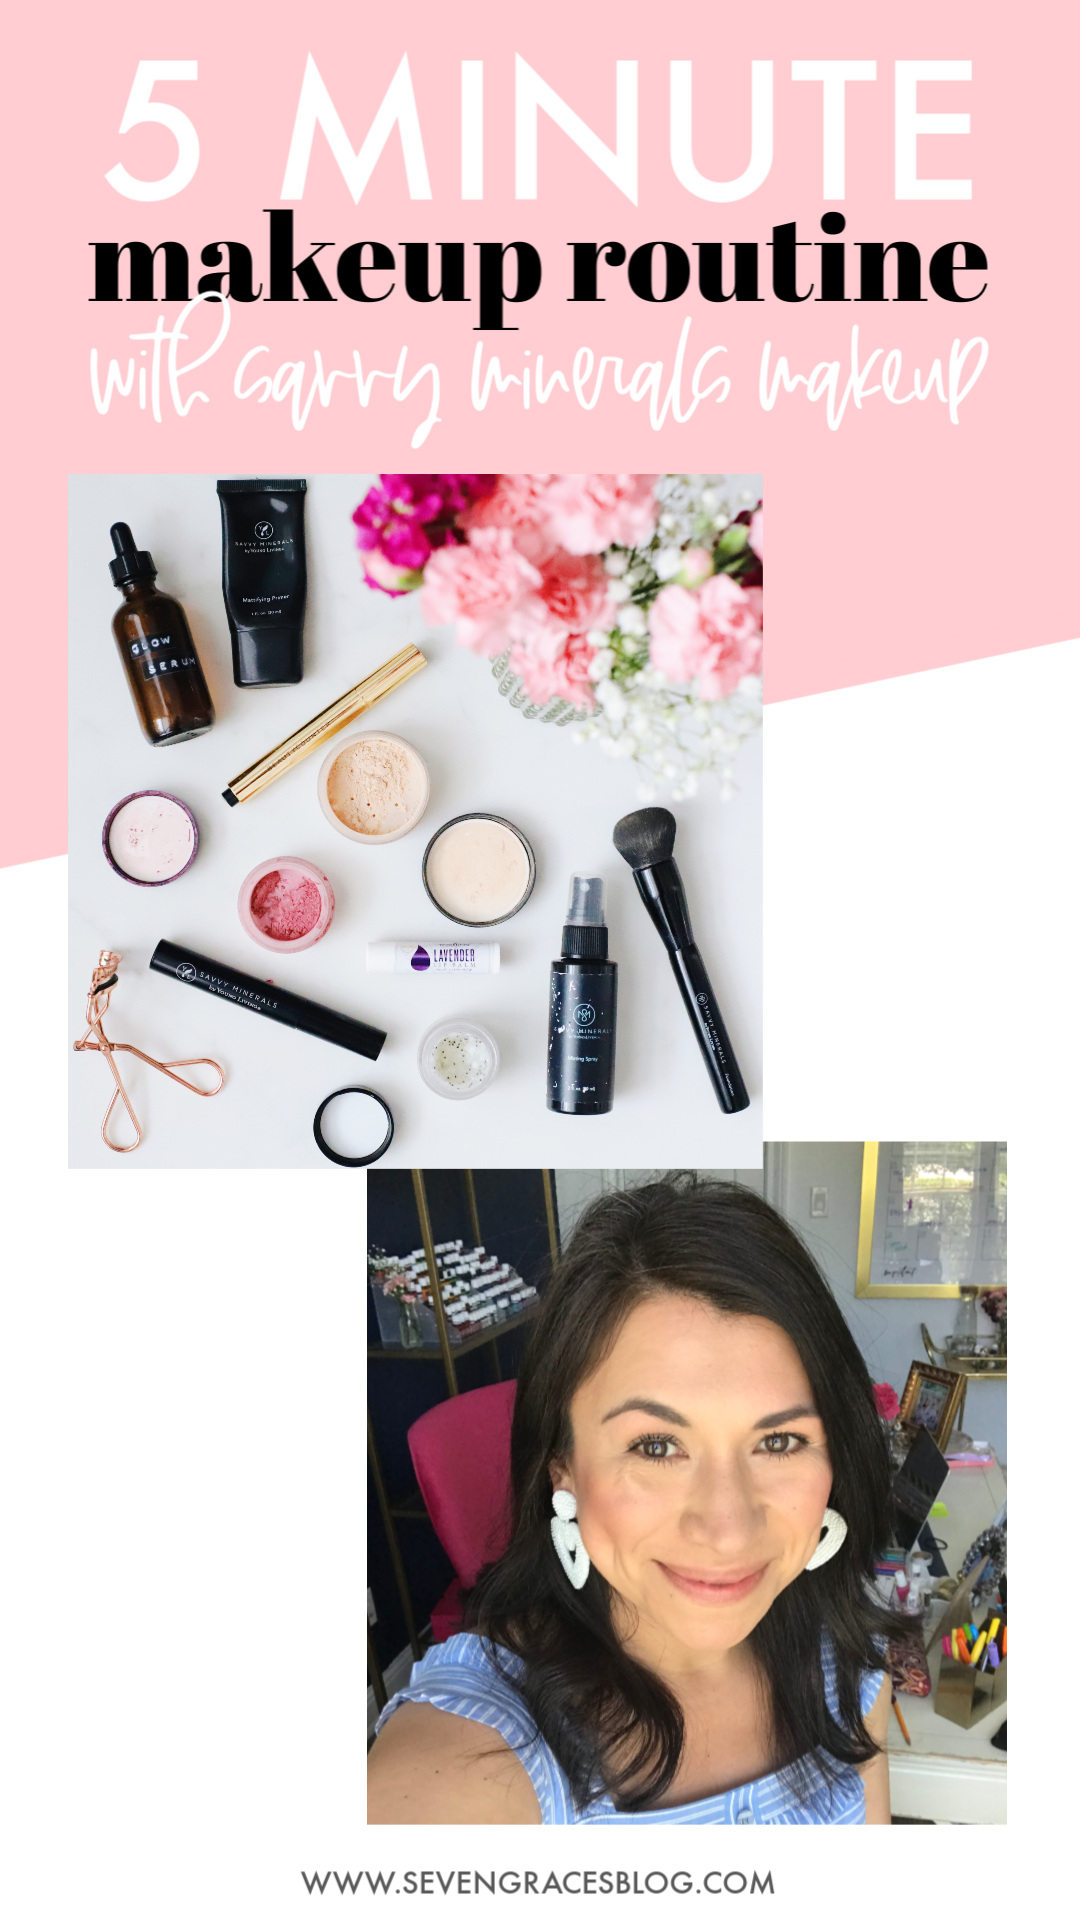 5 minute makeup routine! the best all-natural makeup on the market! Why you need it, how to apply it, and where to get it!